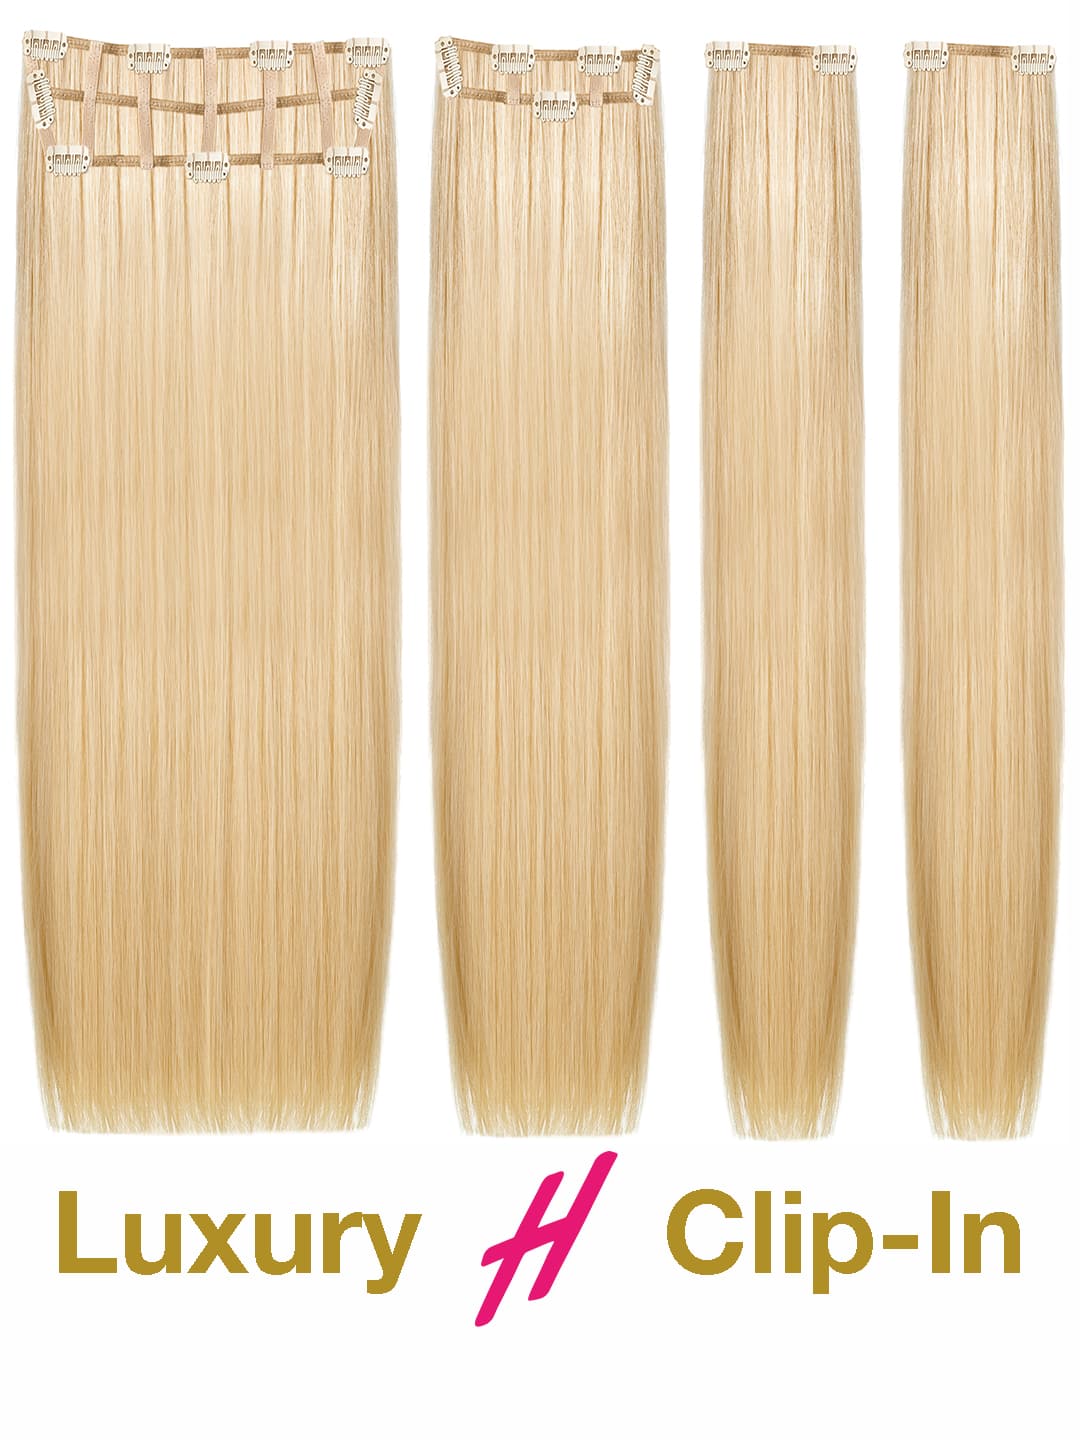 Clip in Extensions - luxury Qualität - easy volume 7-teilig - 125g product image - ac917a377e087c403bc0c34ed5e2426945c237b850fe91b2f12f3f548100a7c7